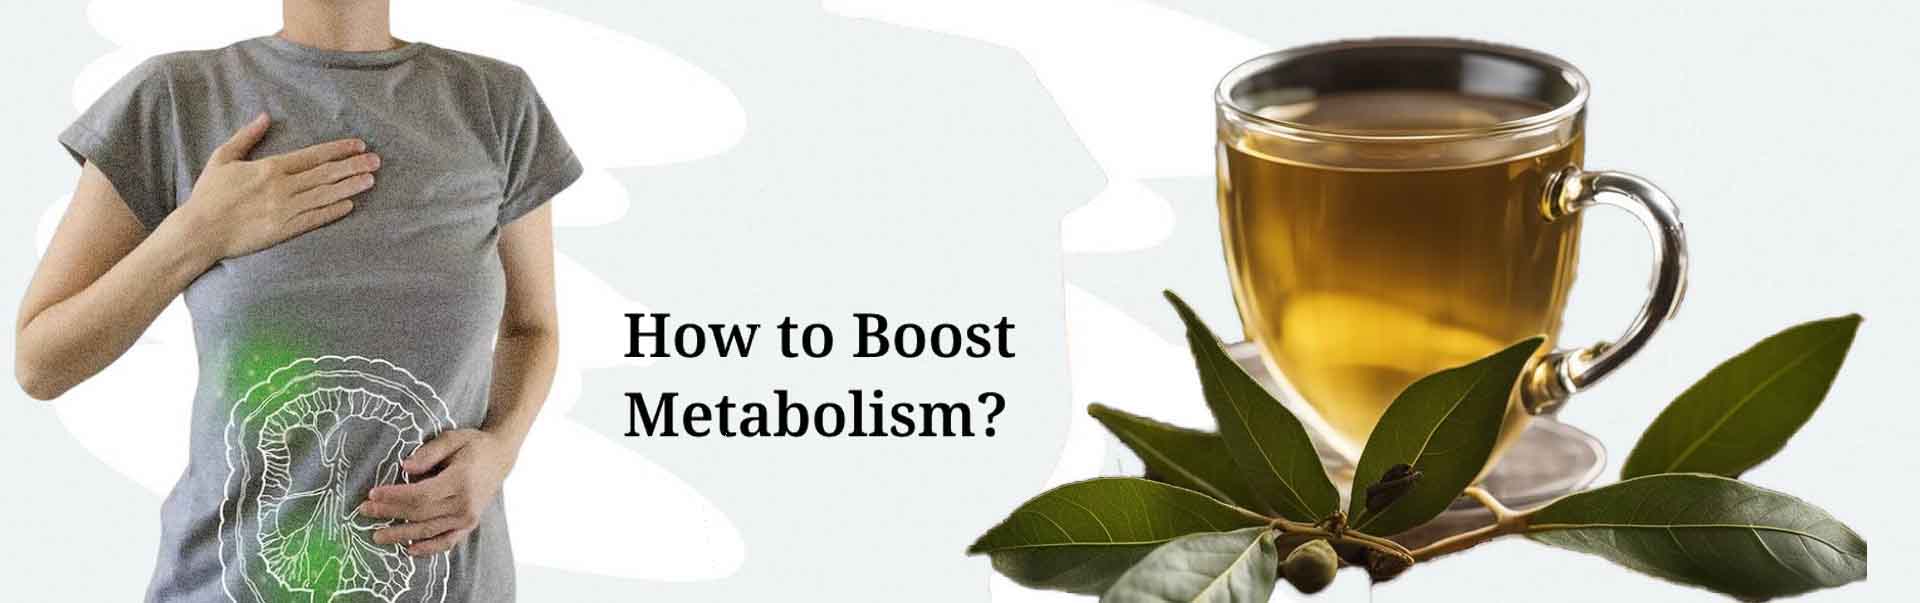 Bay Leaves Help to Lose Weight